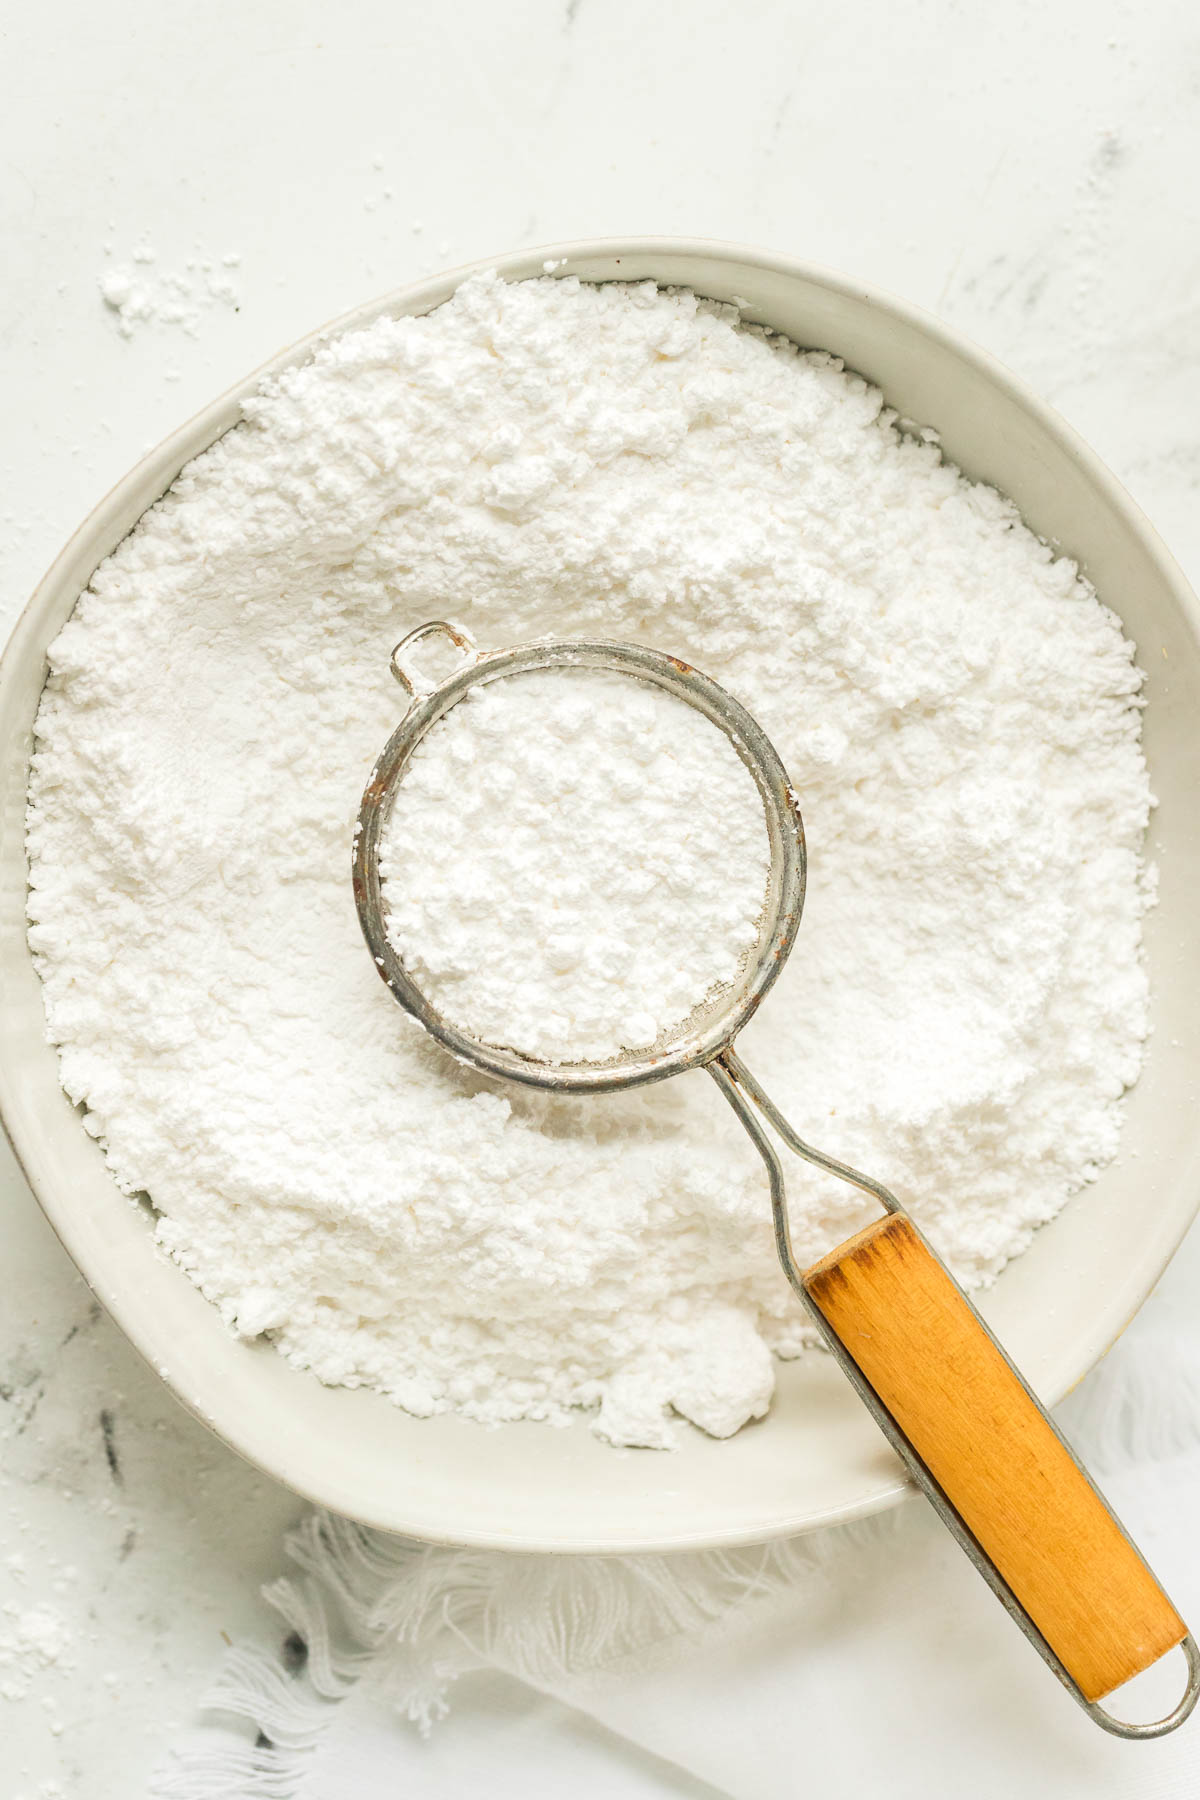 bowl of powdered sugar with a sifter in it